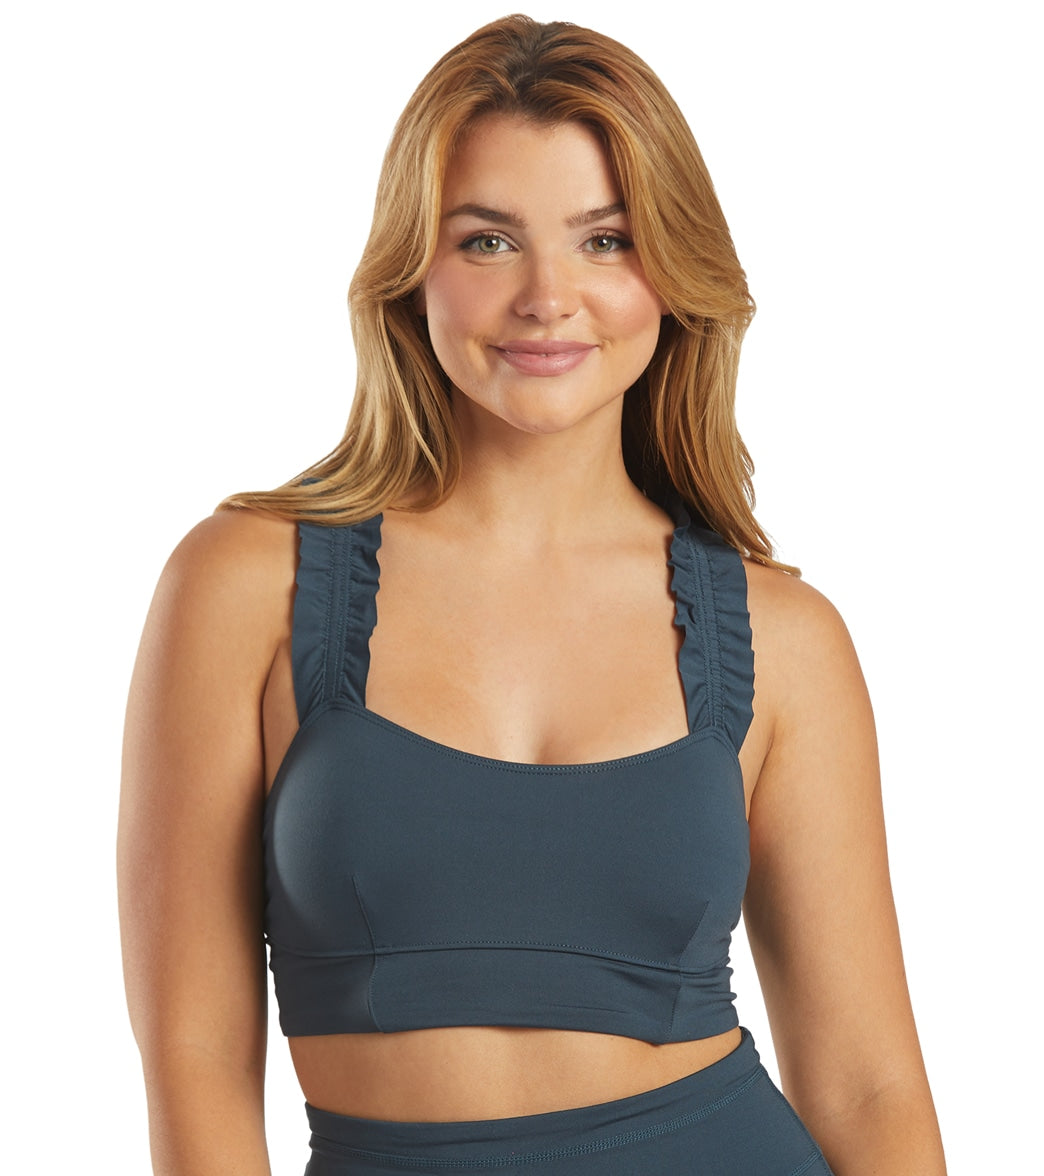 Free People Stay Centered Bra